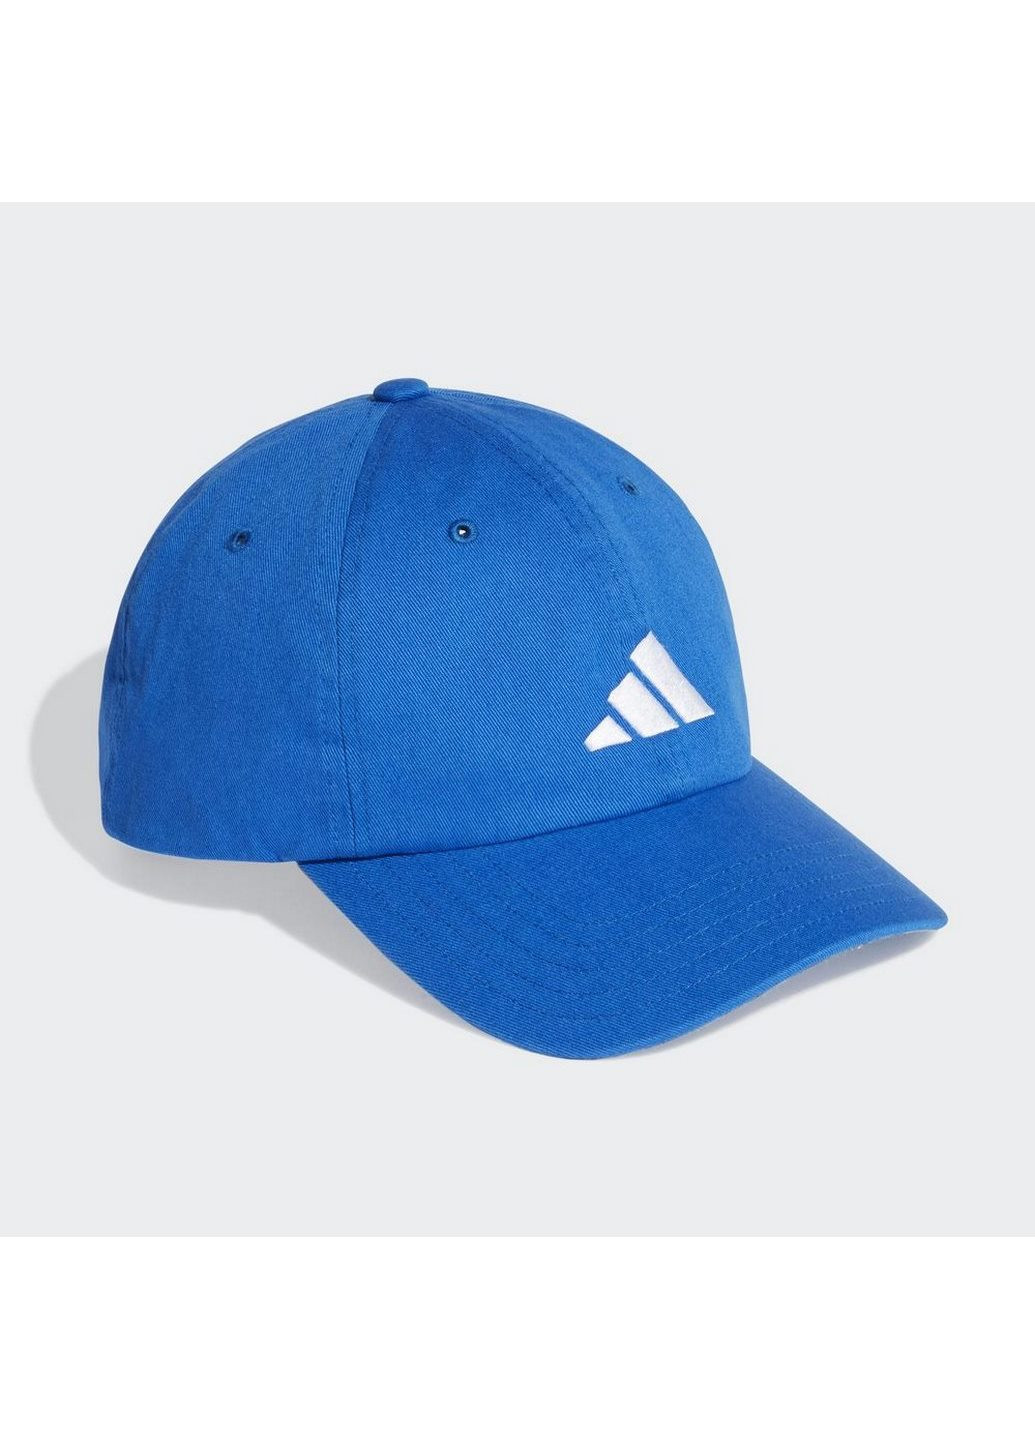 Кепка DAD CAP THE PAC FK4420 adidas (267407527)